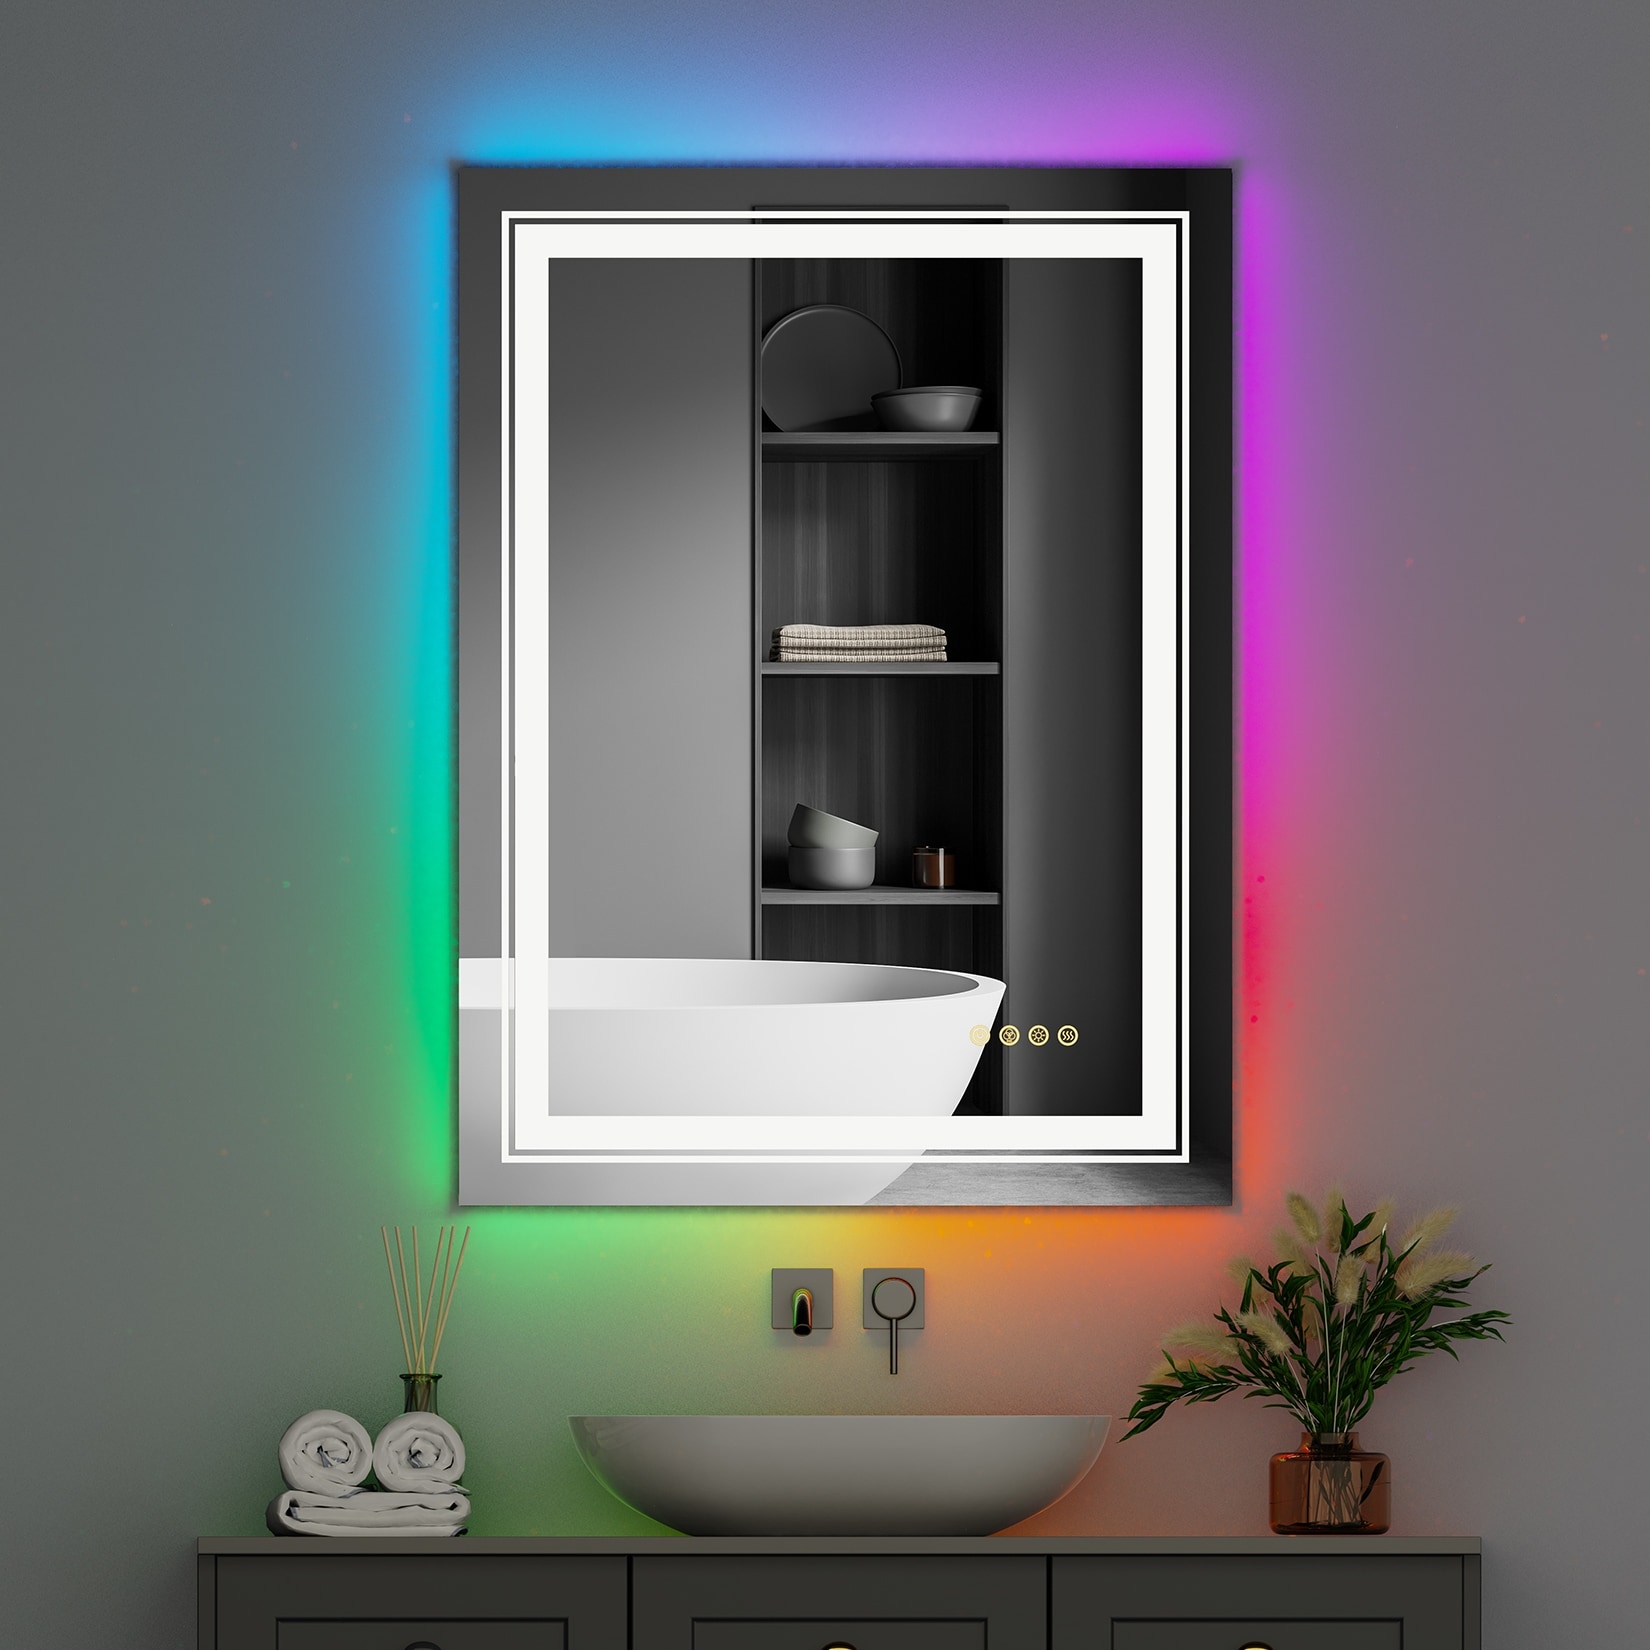 Bedroom mirror ideas: with lights, wood frames or RGB backlight